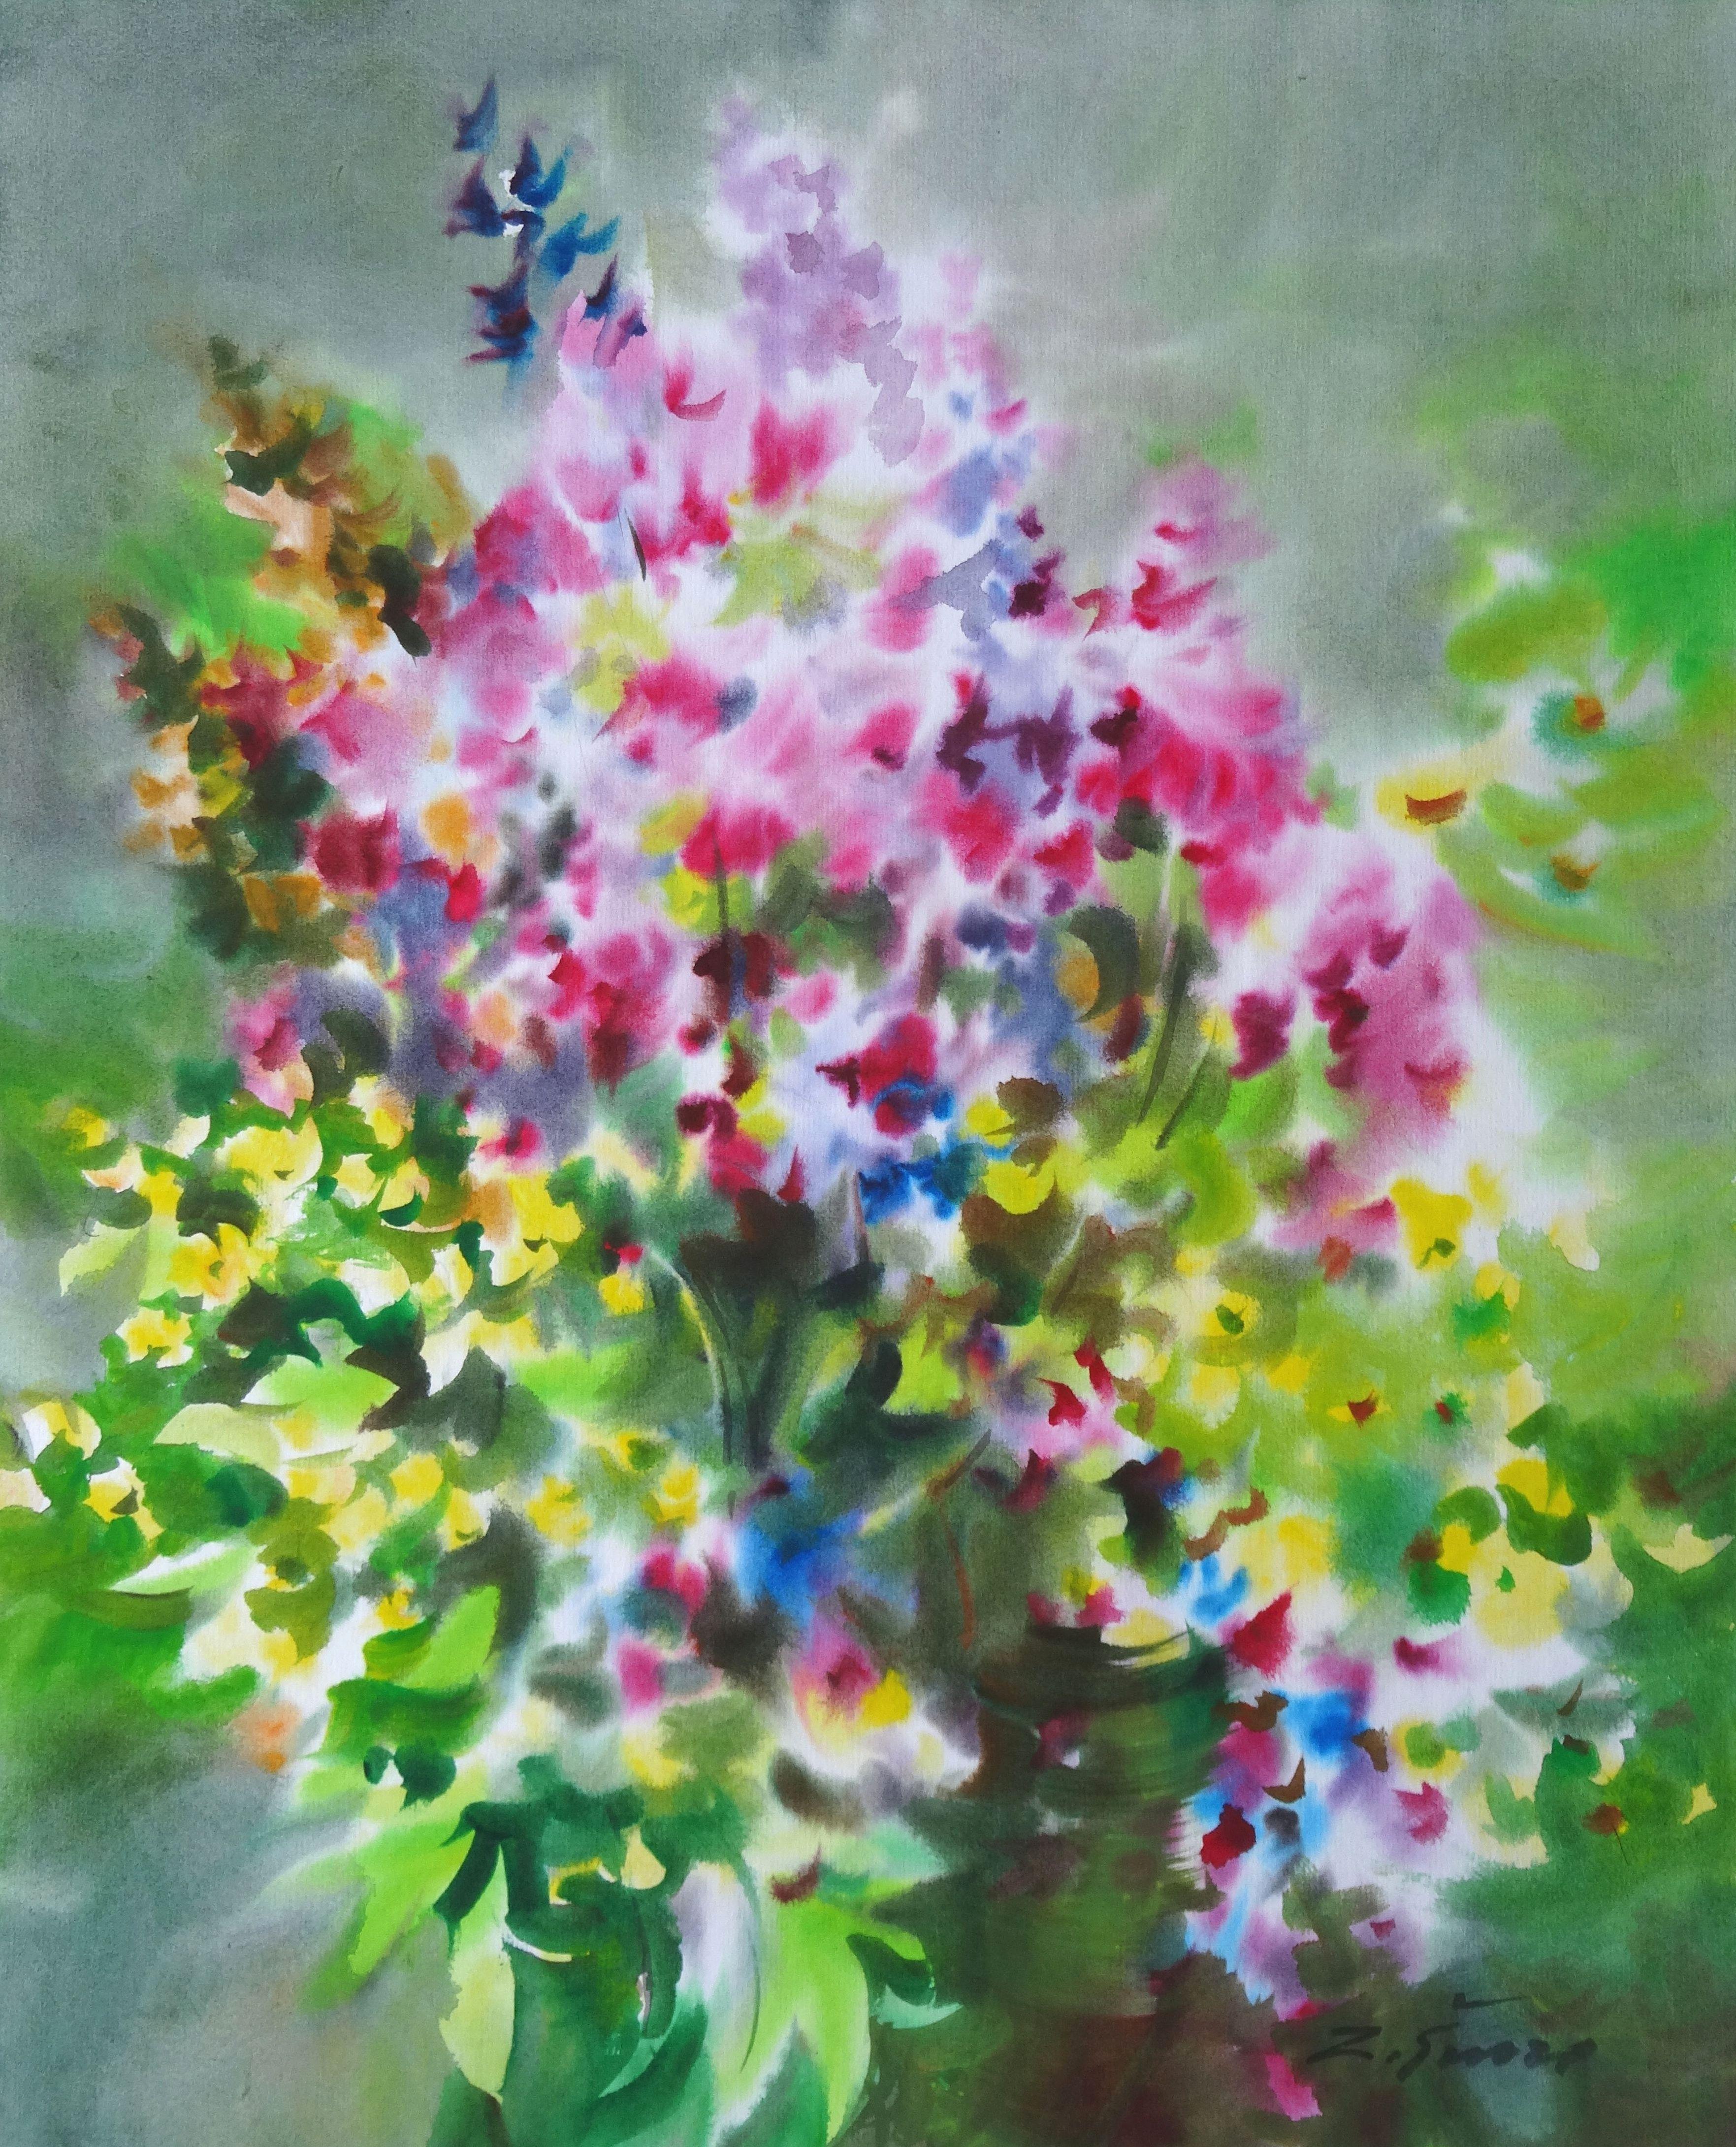 Bright summer flowers. 2020. Watercolor, paper, 74 x 59 cm